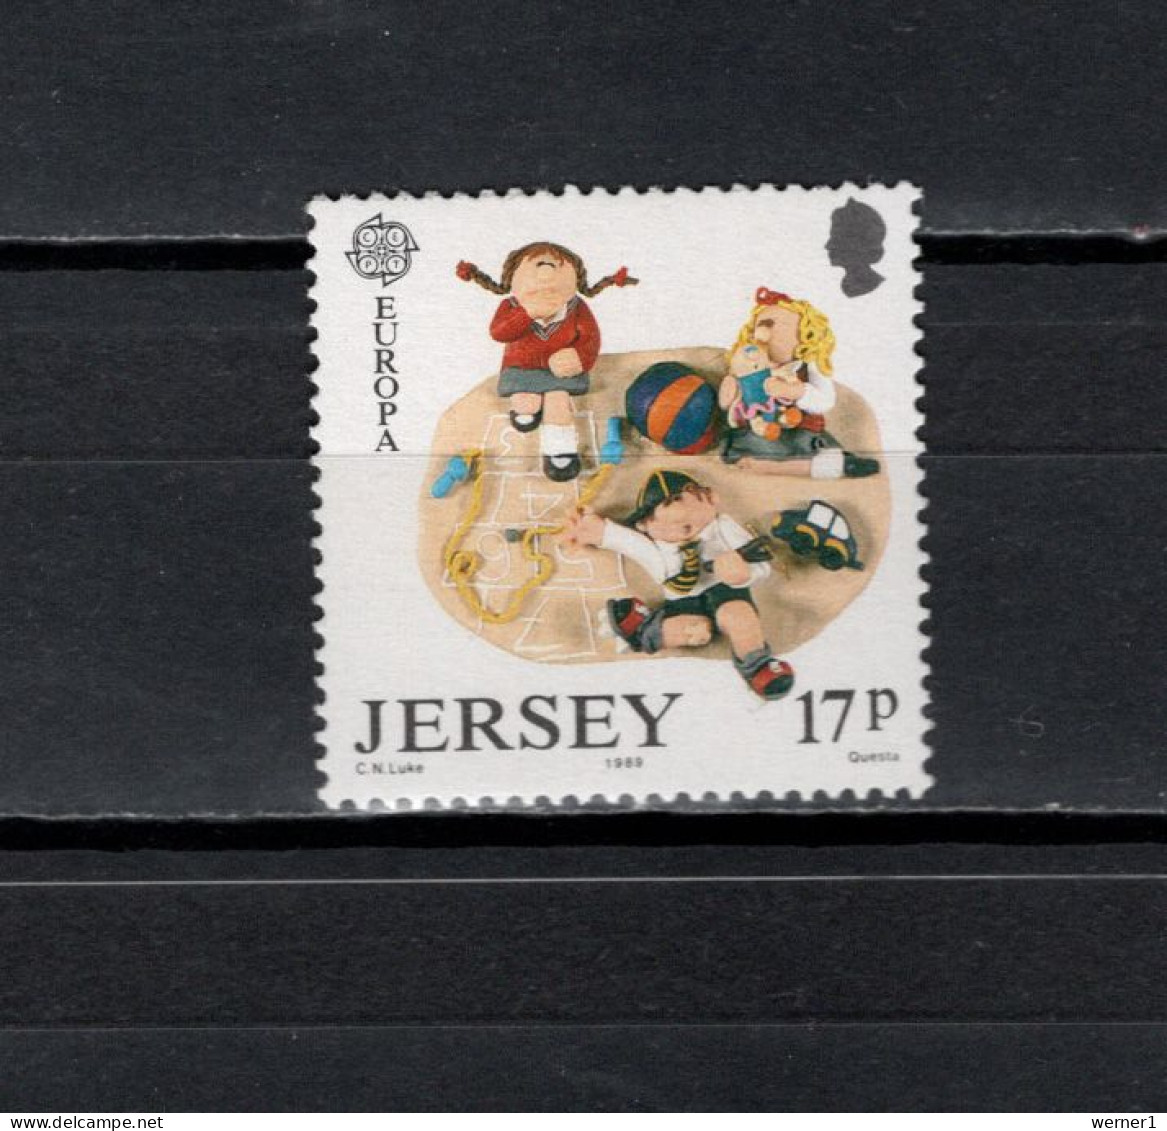 Jersey 1989 Football Soccer, Playing Children Stamp MNH - Nuovi